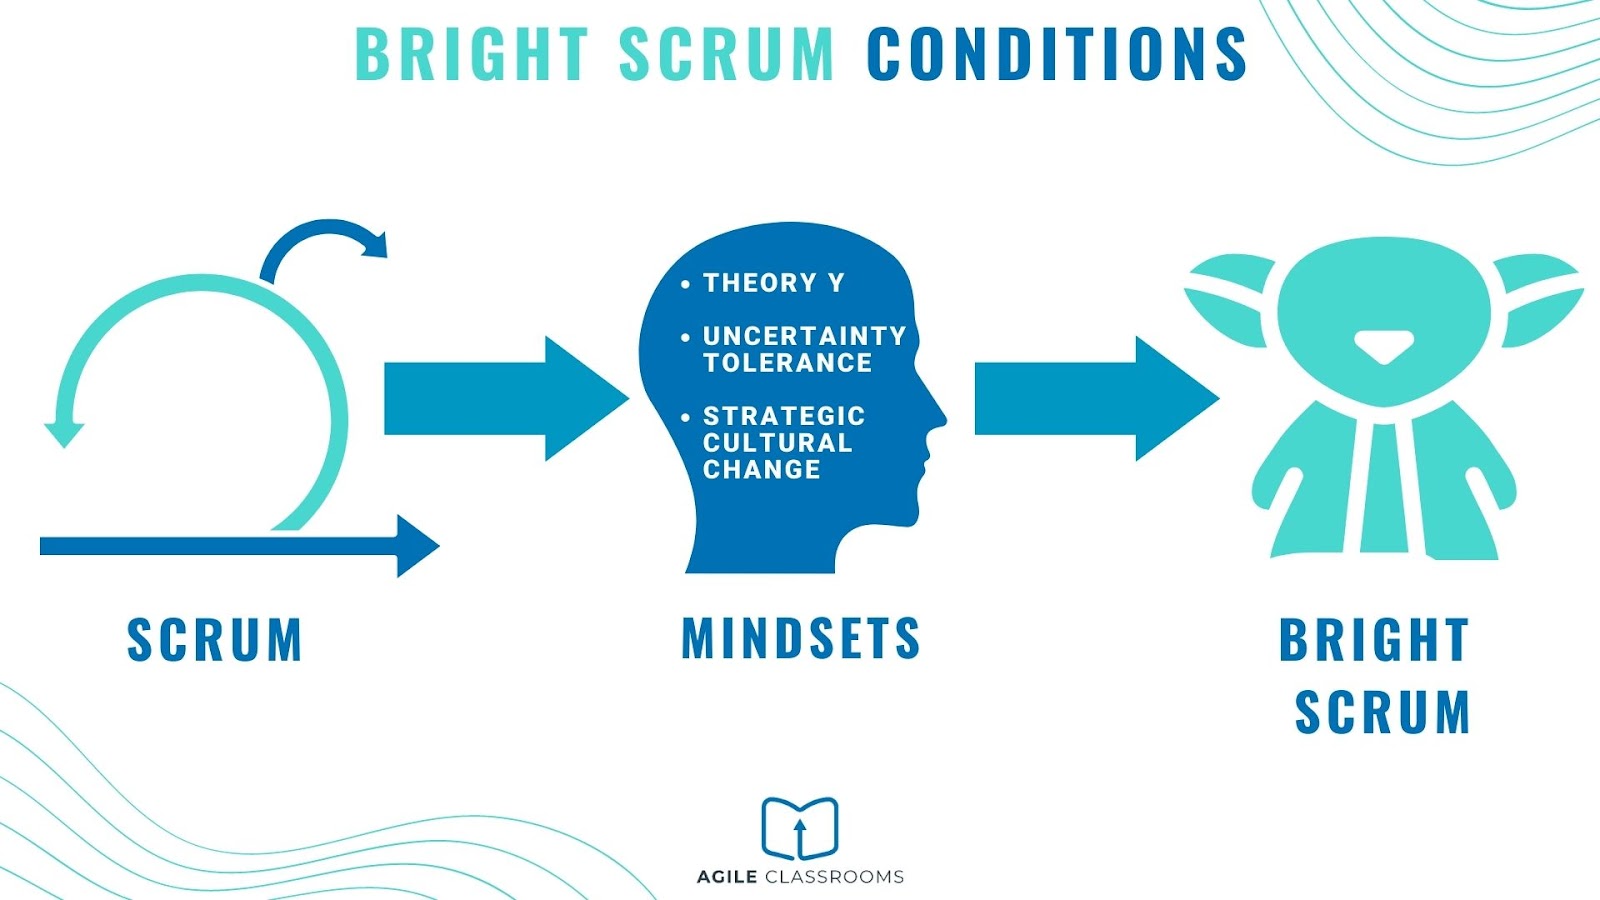 Conditions for Bright Scrum
Scrum when viewed with certain mindsets, results in Bright Scrum
